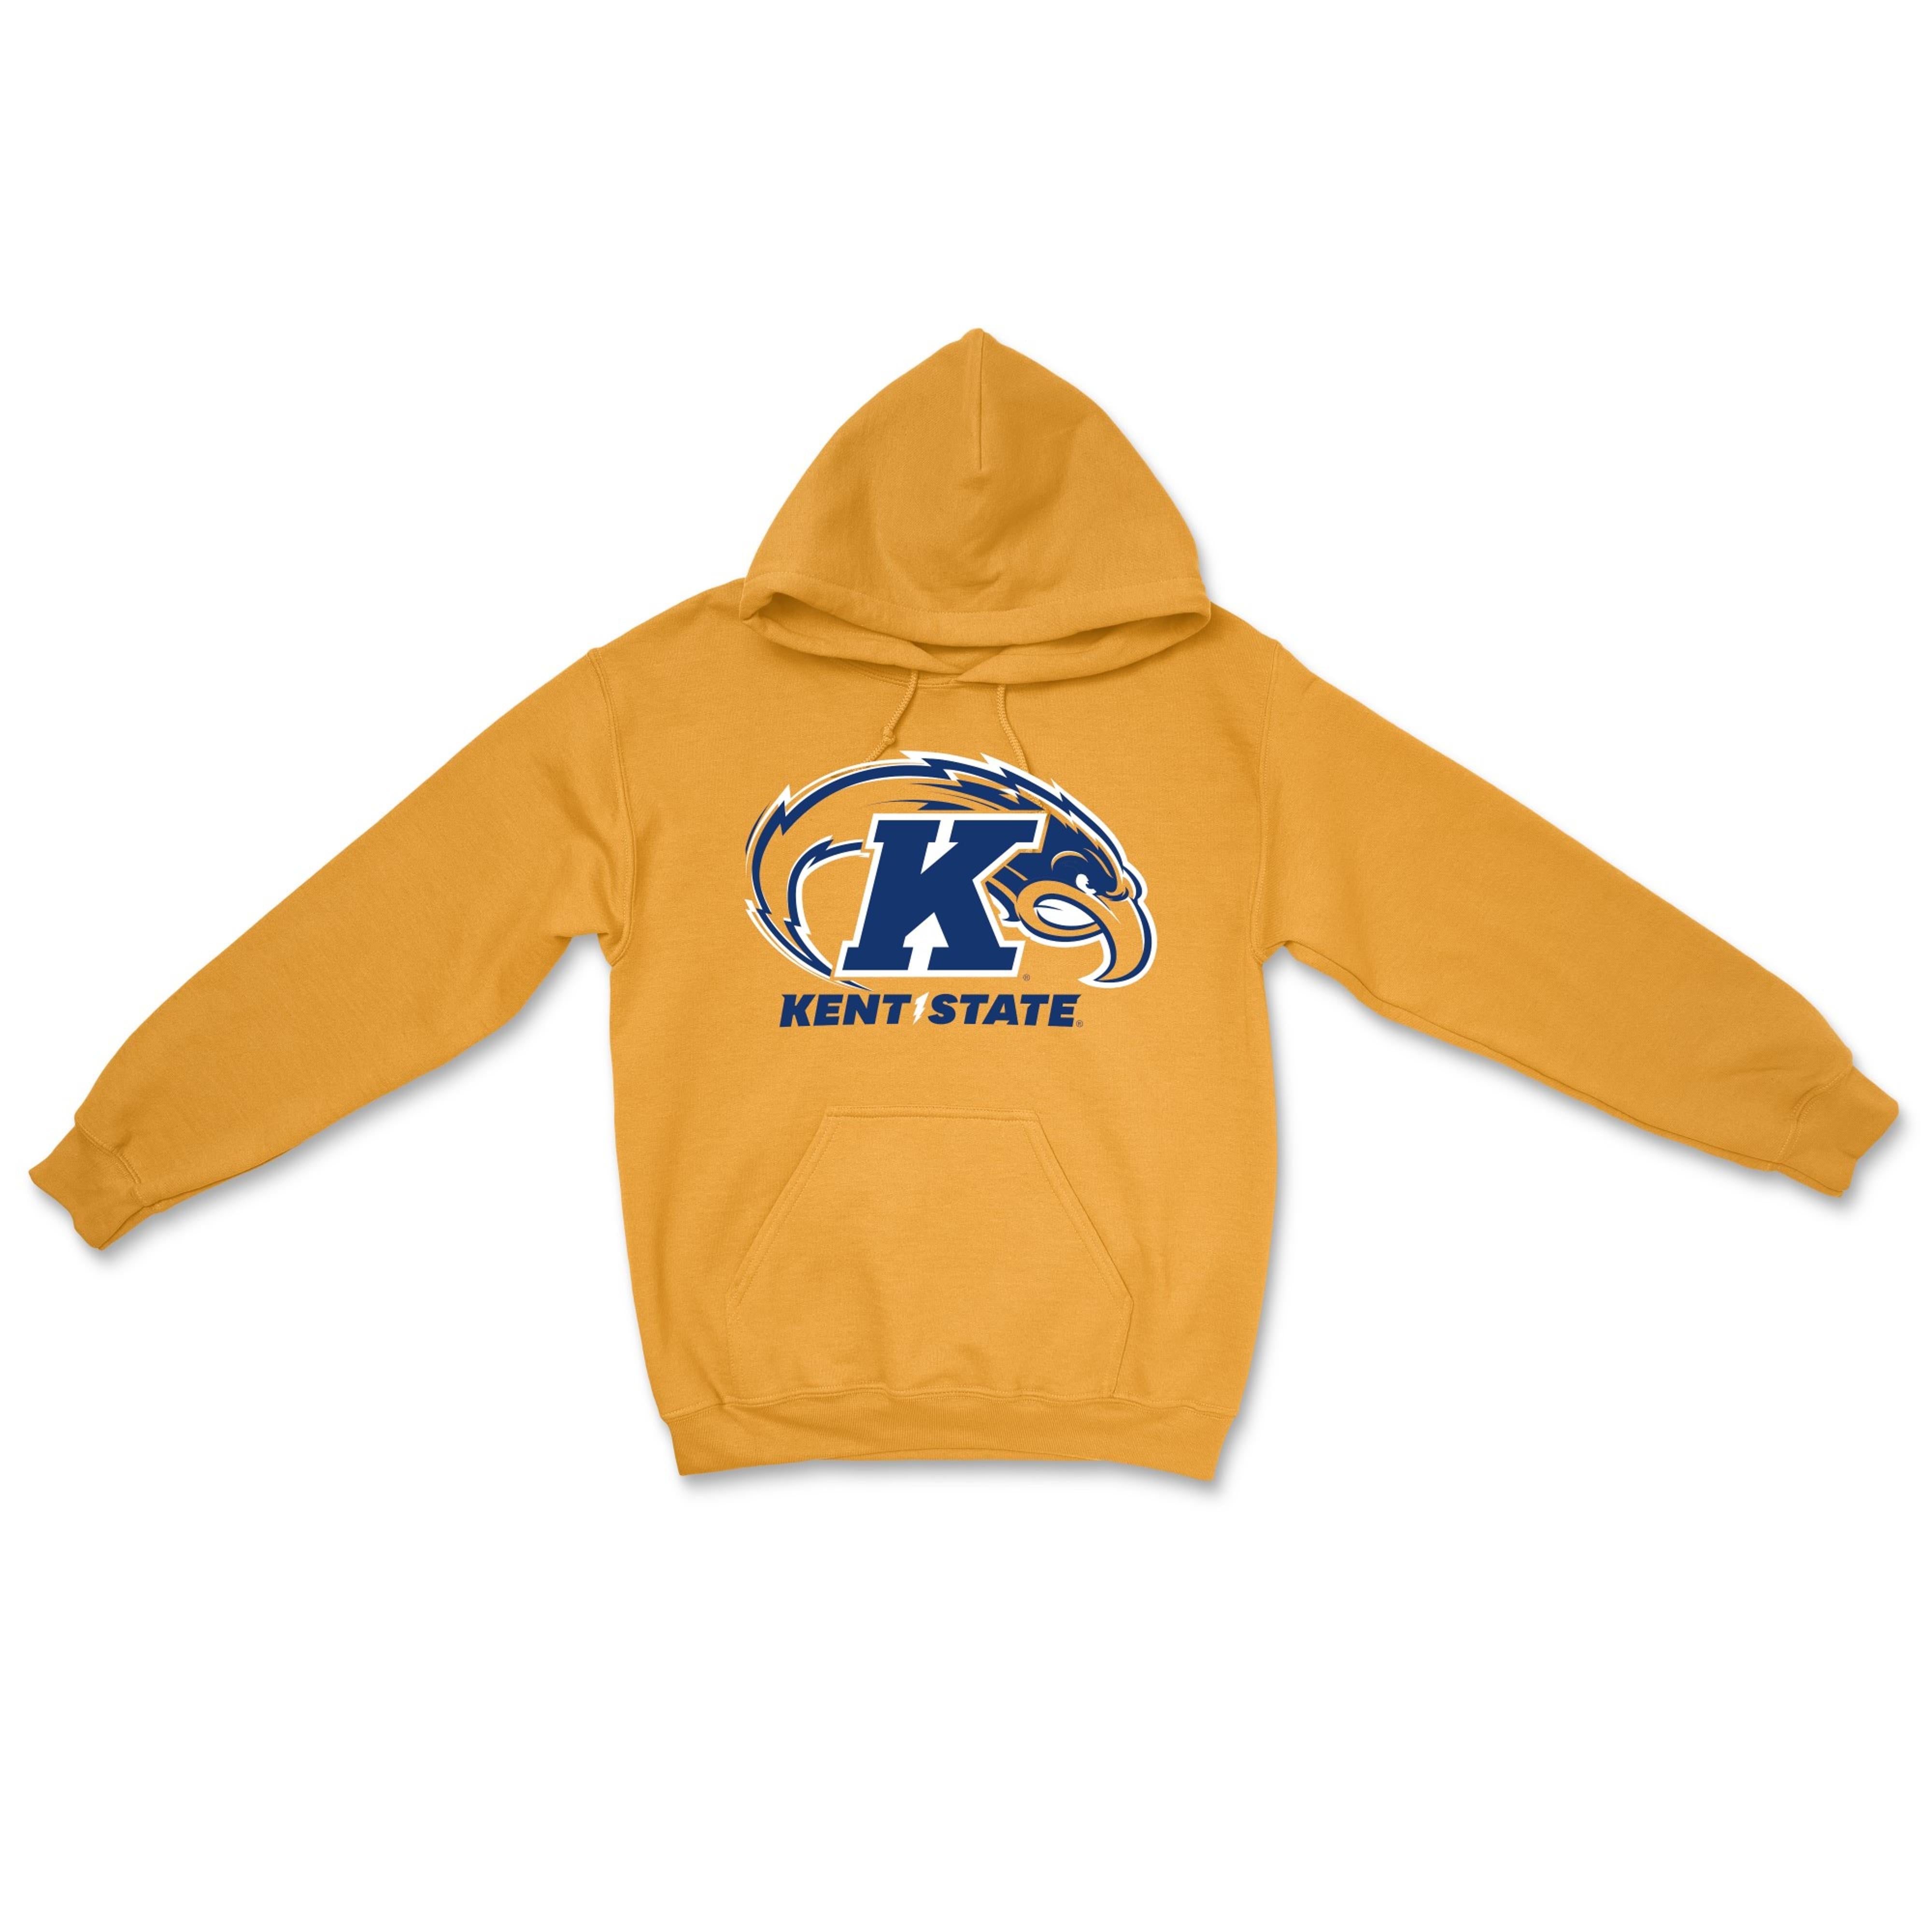 Kent State Gold Youth Hoodie